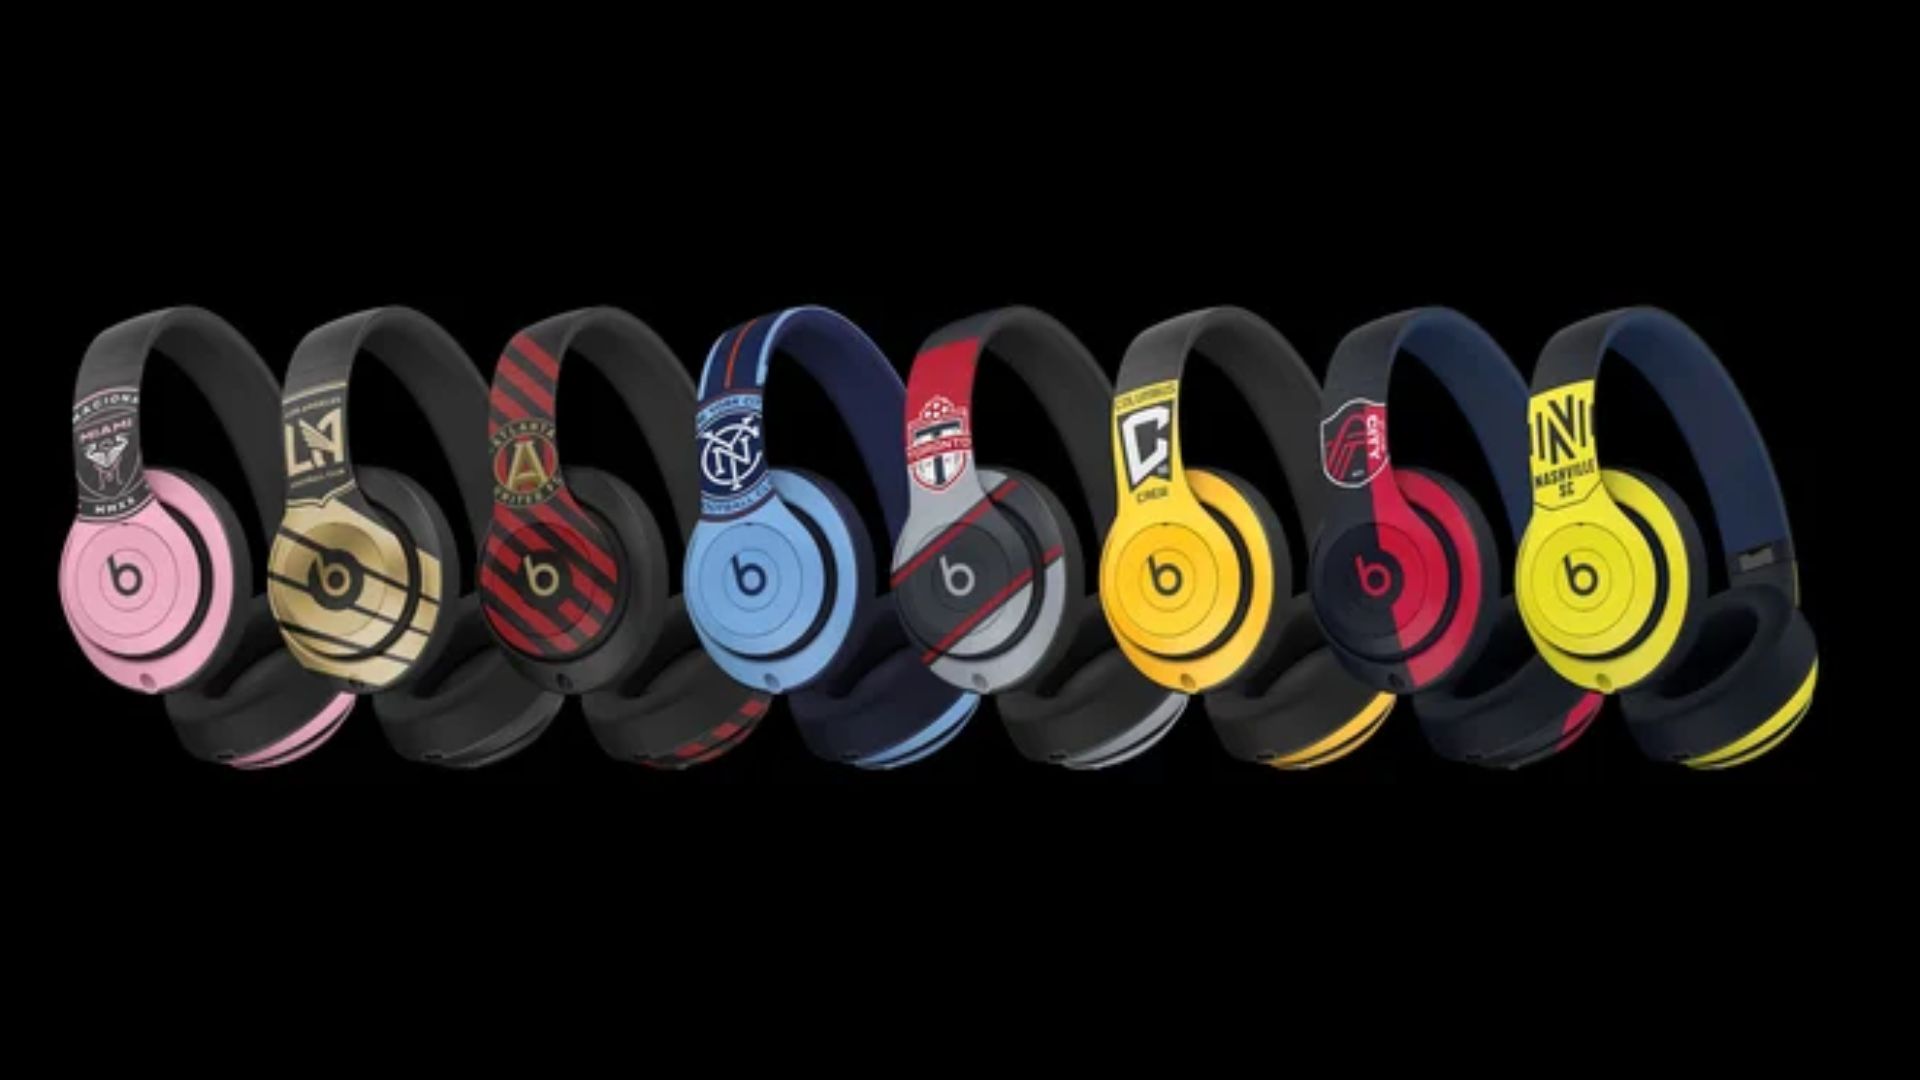 Behind Major league soccer’s new deal with beats